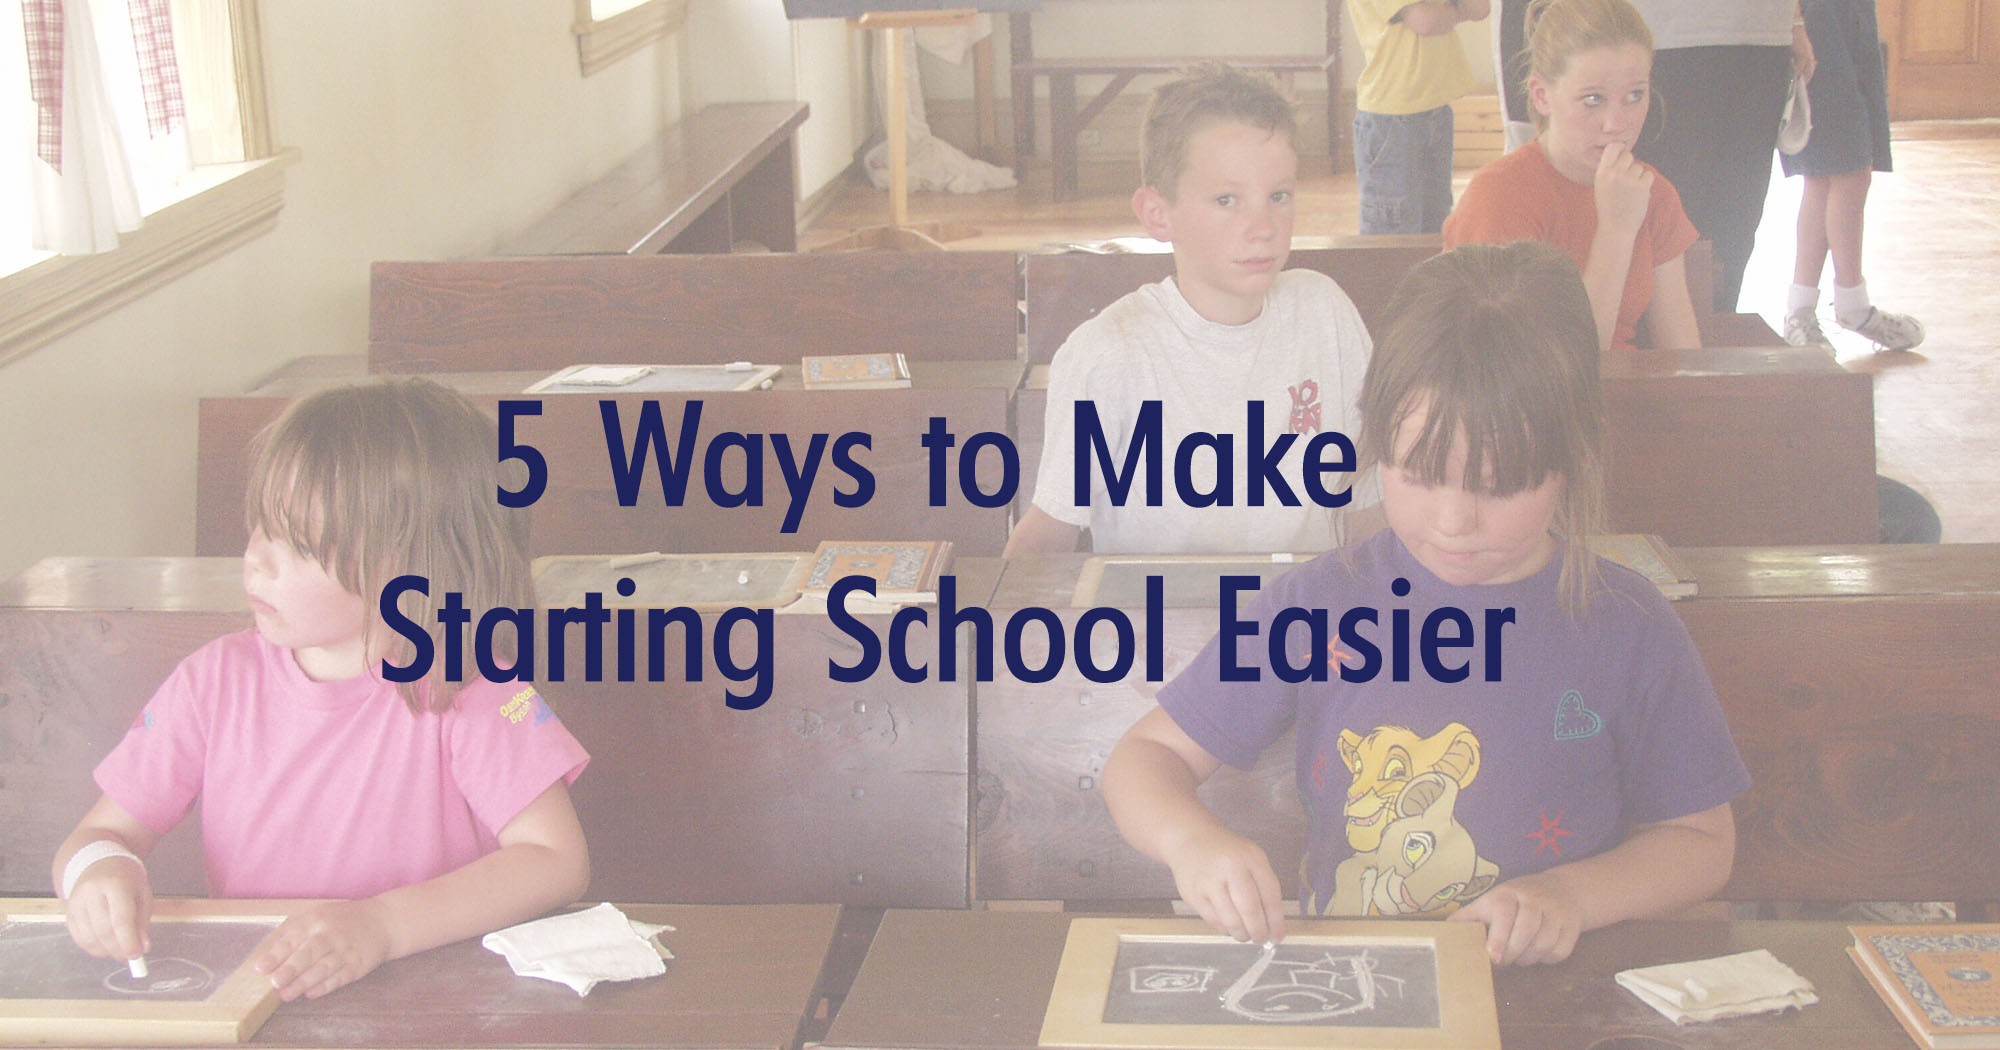 children in a school room with the words 5 ways to make starting school easier